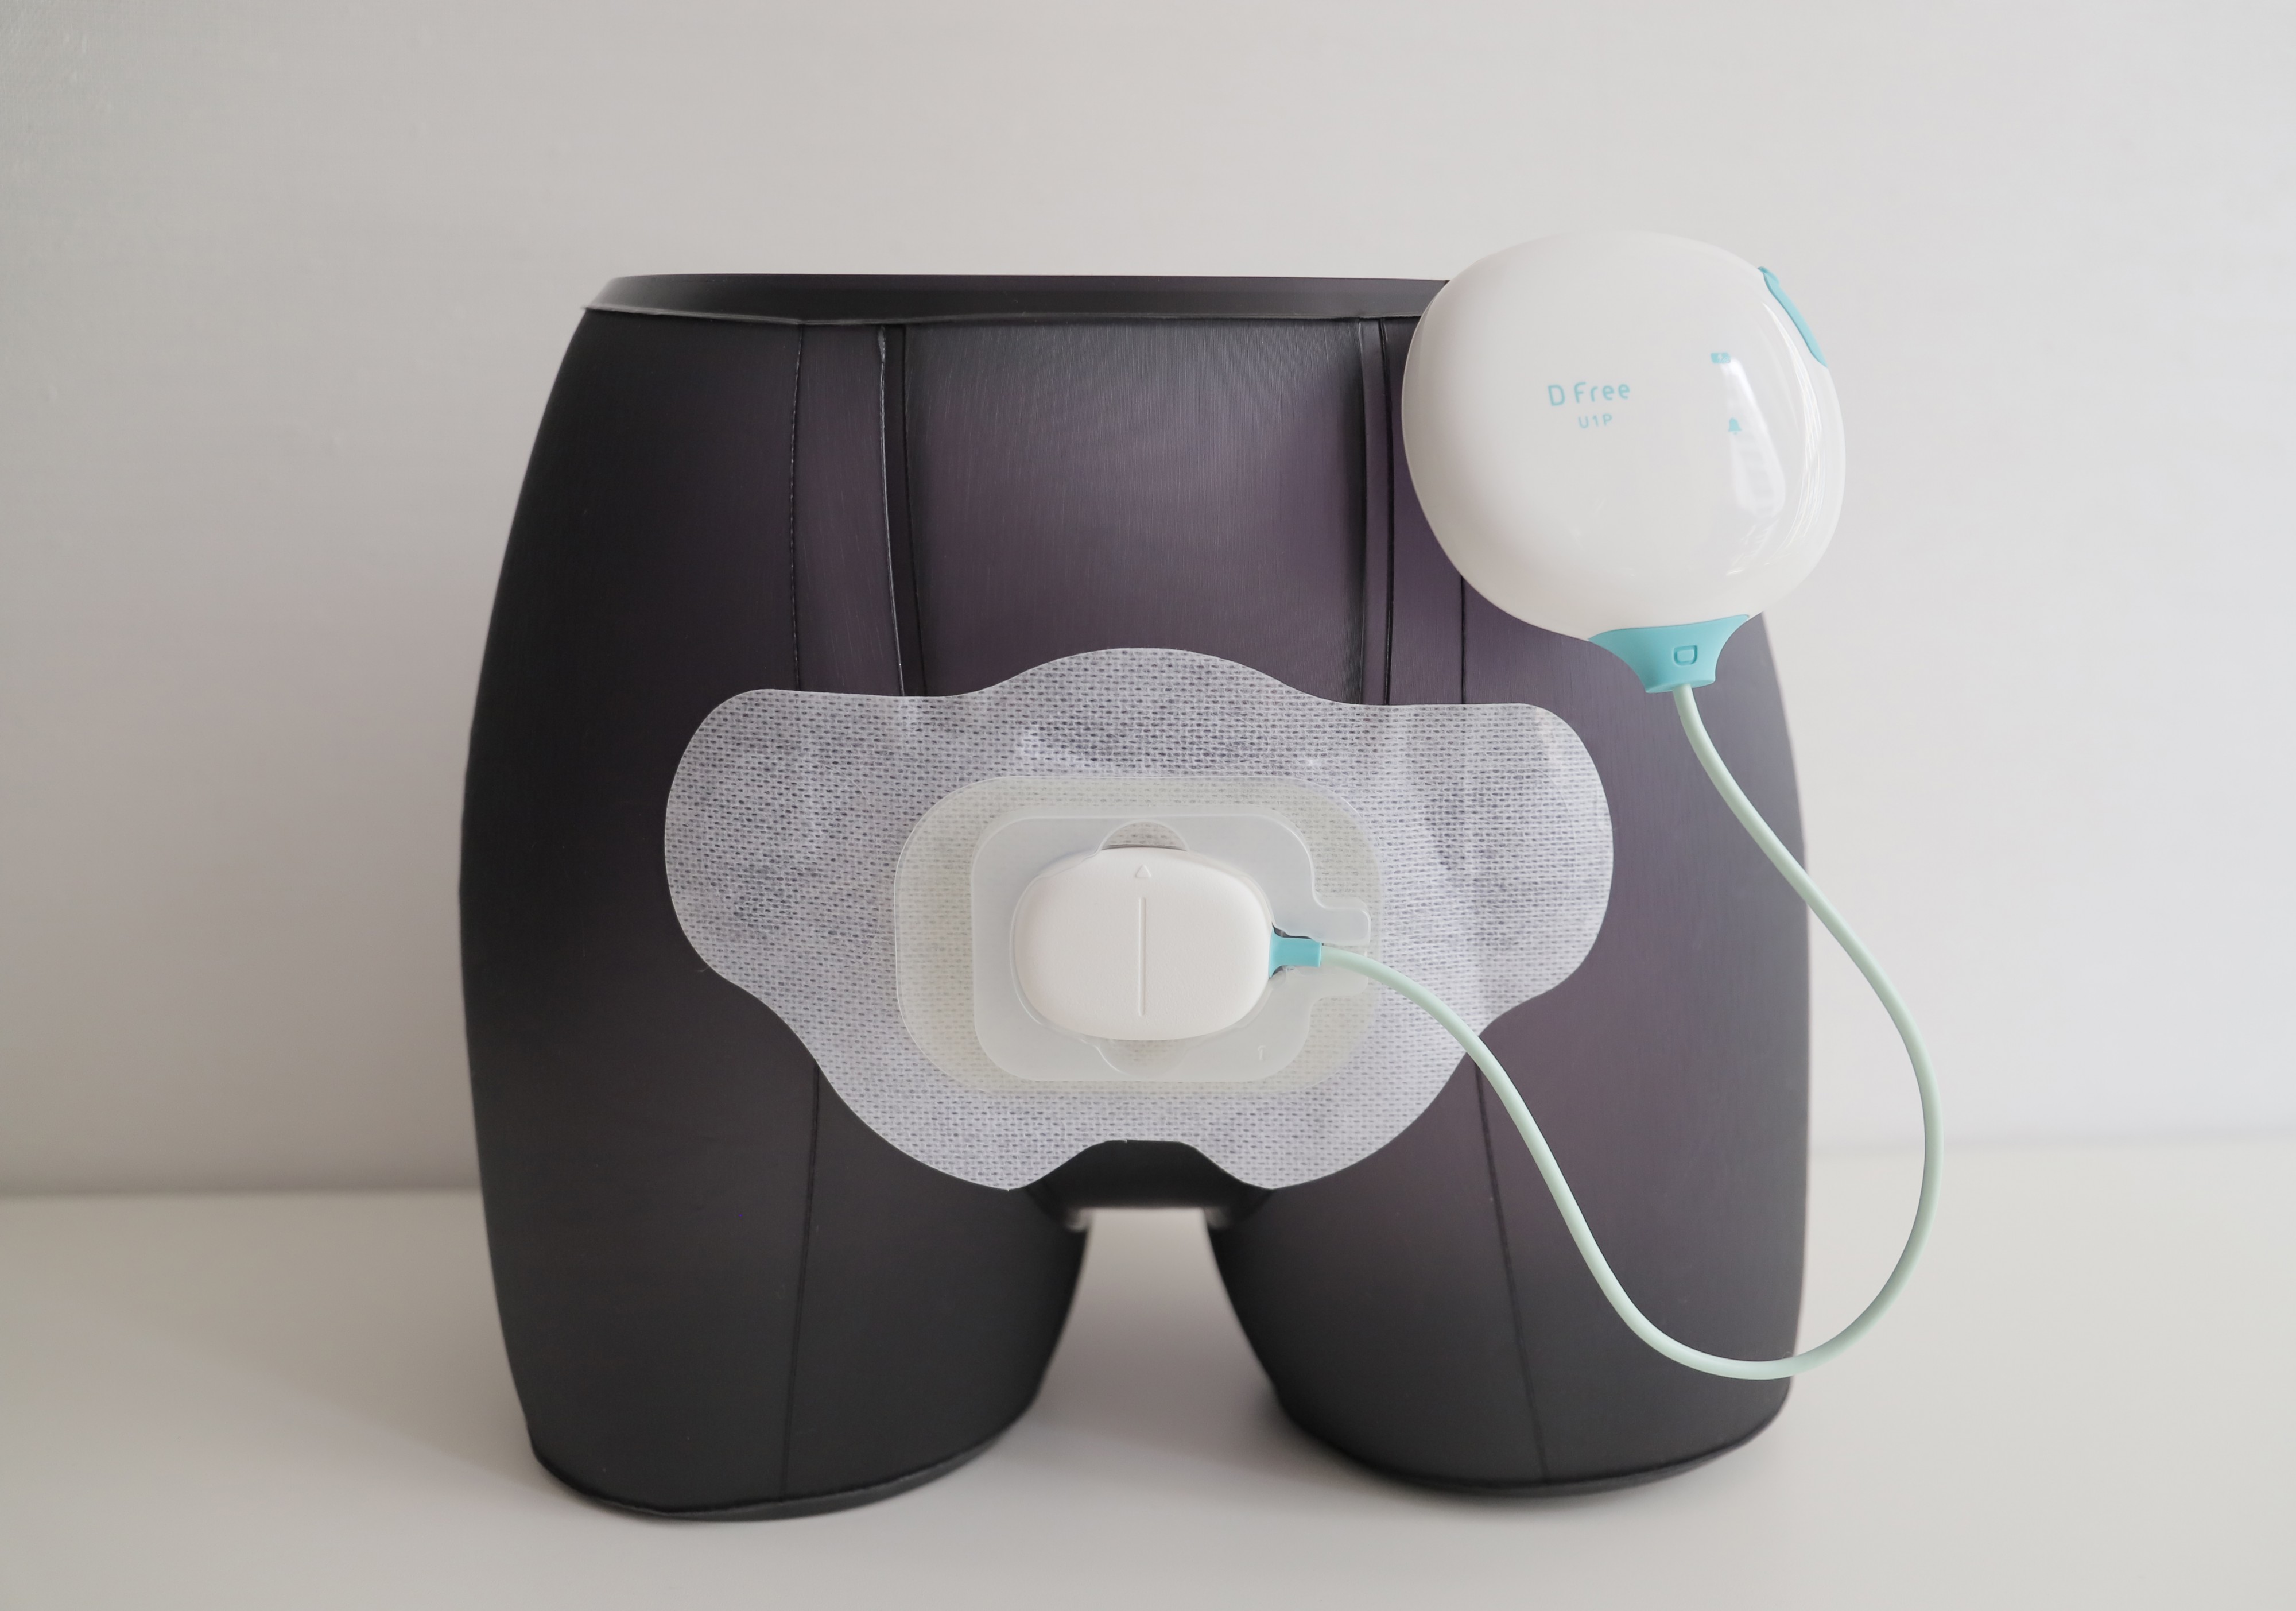 DFree® device for urinary incontinence and D-pad accessory that helps to position DFree ultrasound sensor in correct place over the bladder.